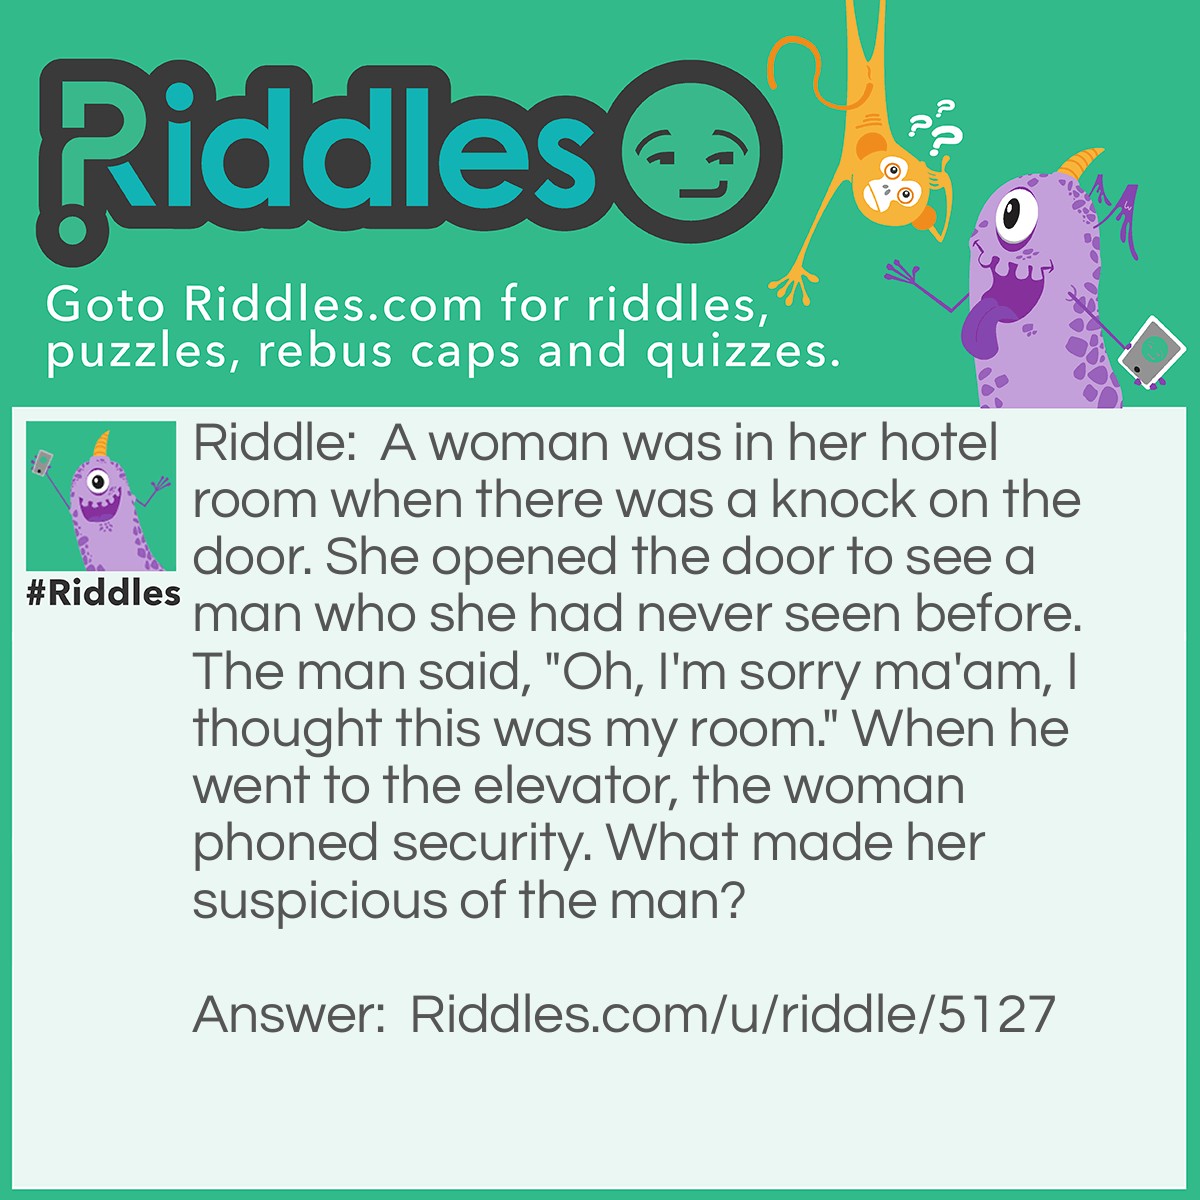 Riddle: A woman was in her hotel room when there was a knock on the door. She opened the door to see a man who she had never seen before. The man said, "Oh, I'm sorry ma'am, I thought this was my room." When he went to the elevator, the woman phoned security. What made her suspicious of the man? Answer: You think you would knock on your own door?